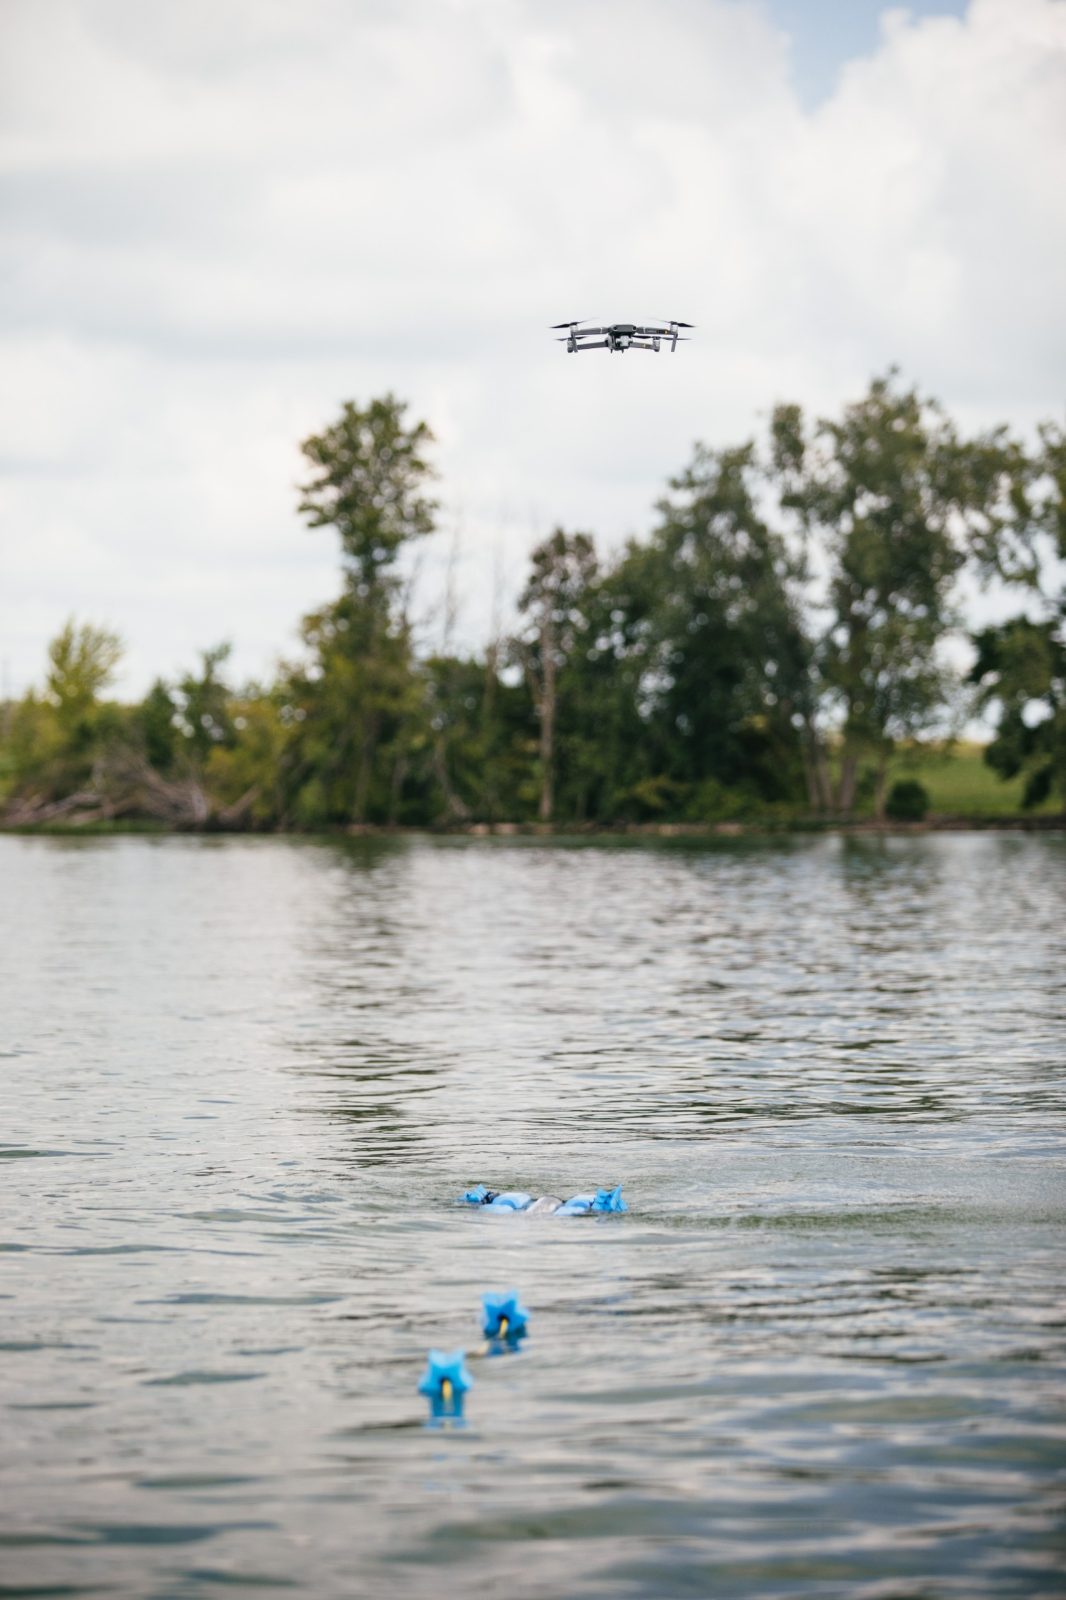 A drone hovers above a swimming ROV equipped with bright blue sensors that follow in its wake. It heads in the direction of the coast, which is riddled with living and dead trees. Courtesy of Christina+David.